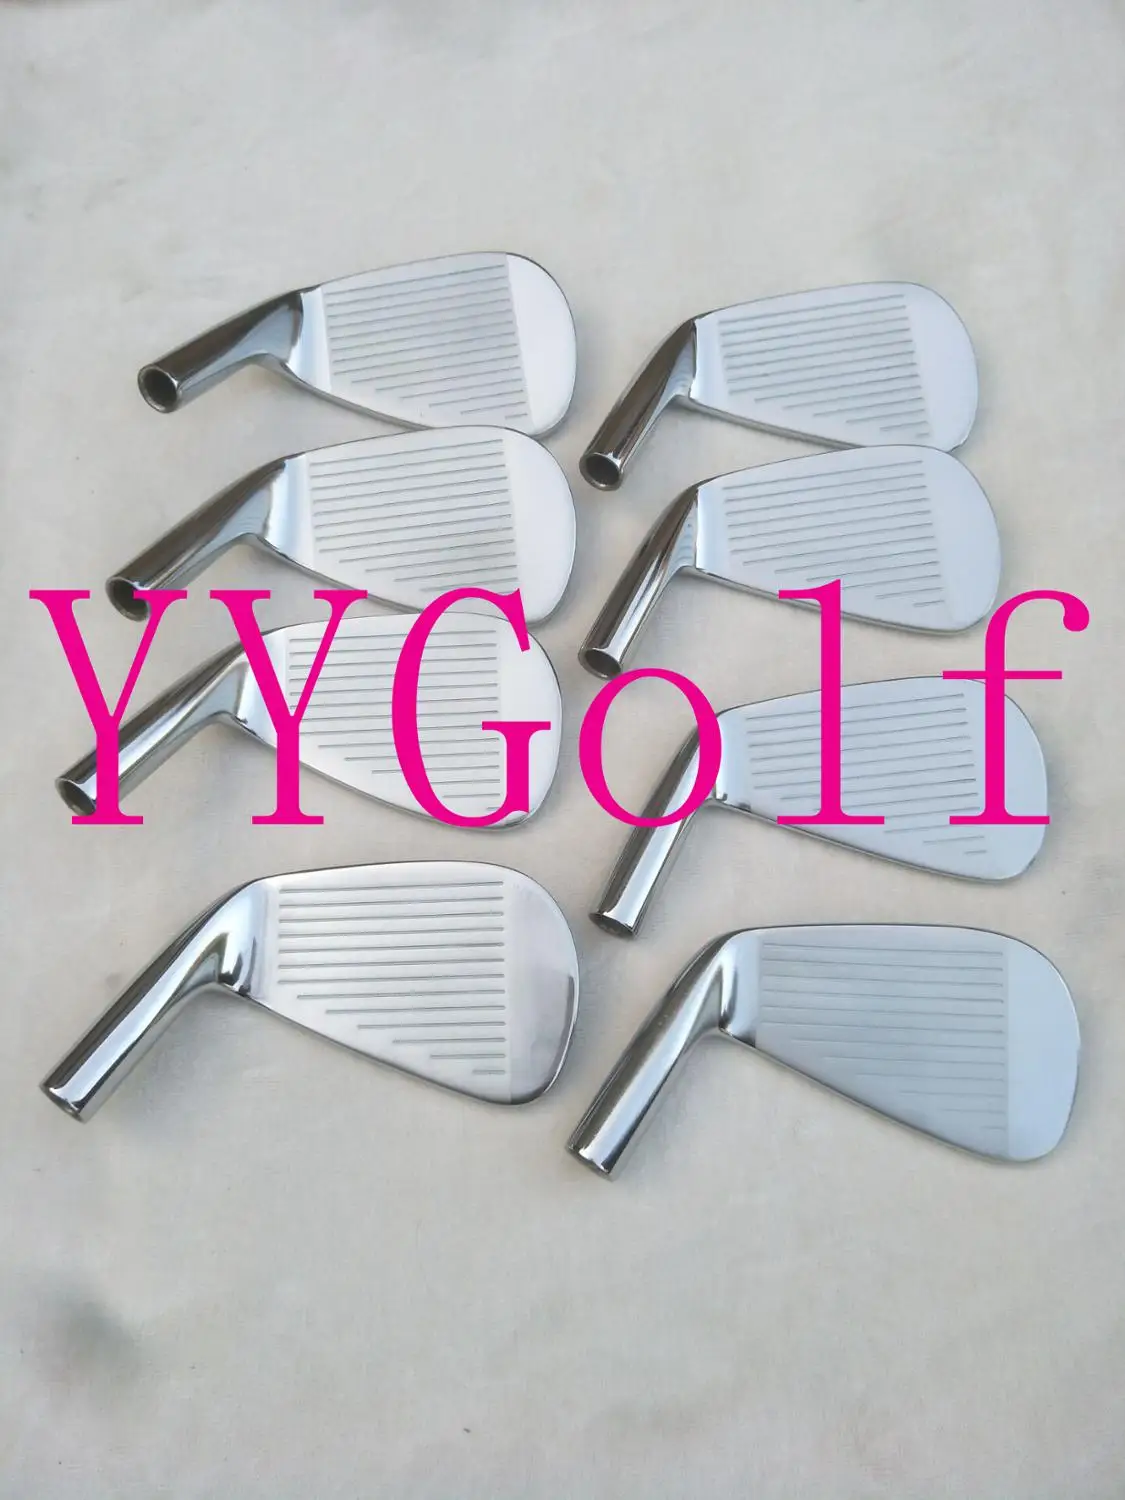 

8PCS MP-20 Golf Clubs Irons MP20 Golf Irons Set 3-9P R/S Steel/Graphite Shafts Including Headcovers DHL Free Shipping